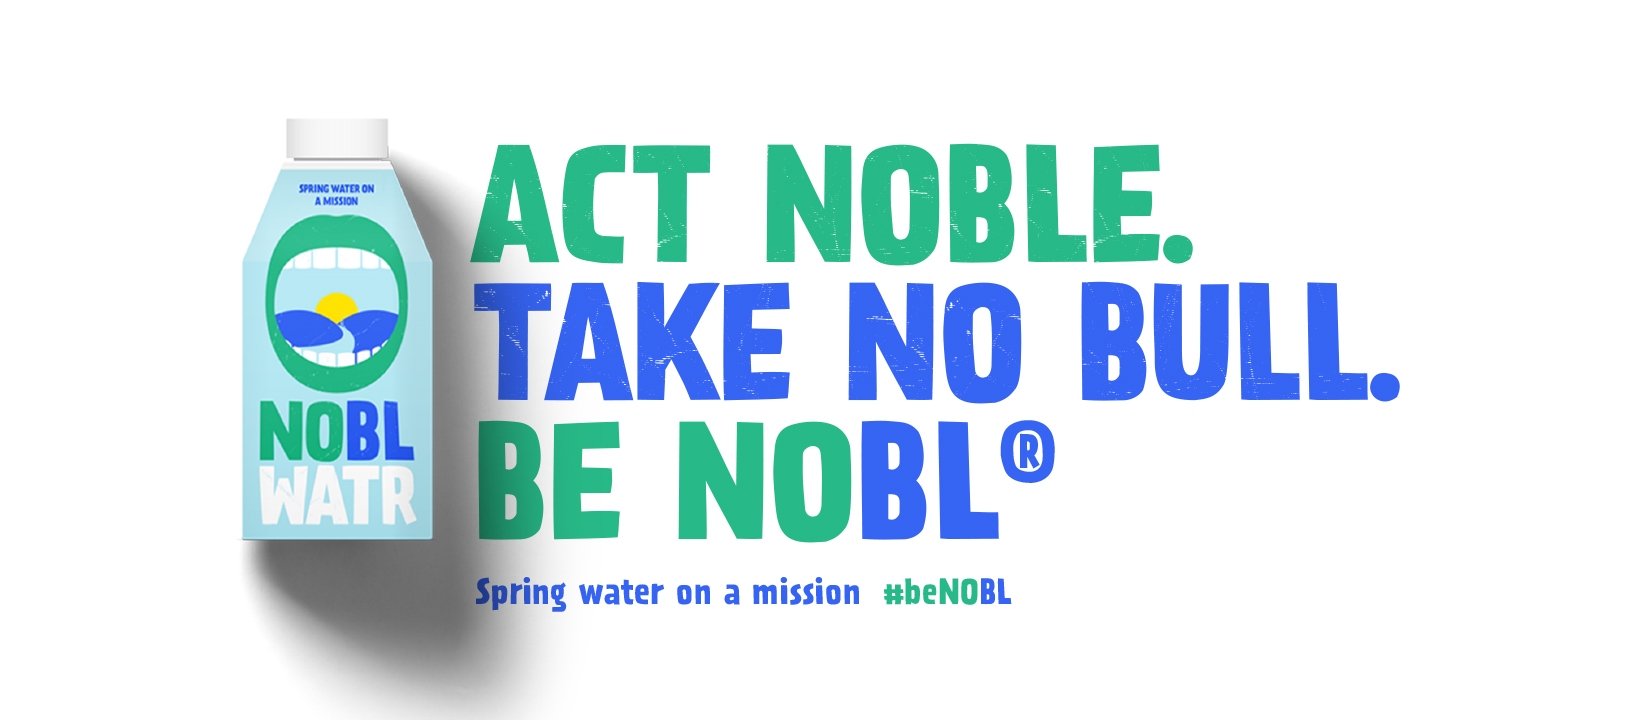 NOBL WATER: SPRING WATER ON A MISSION